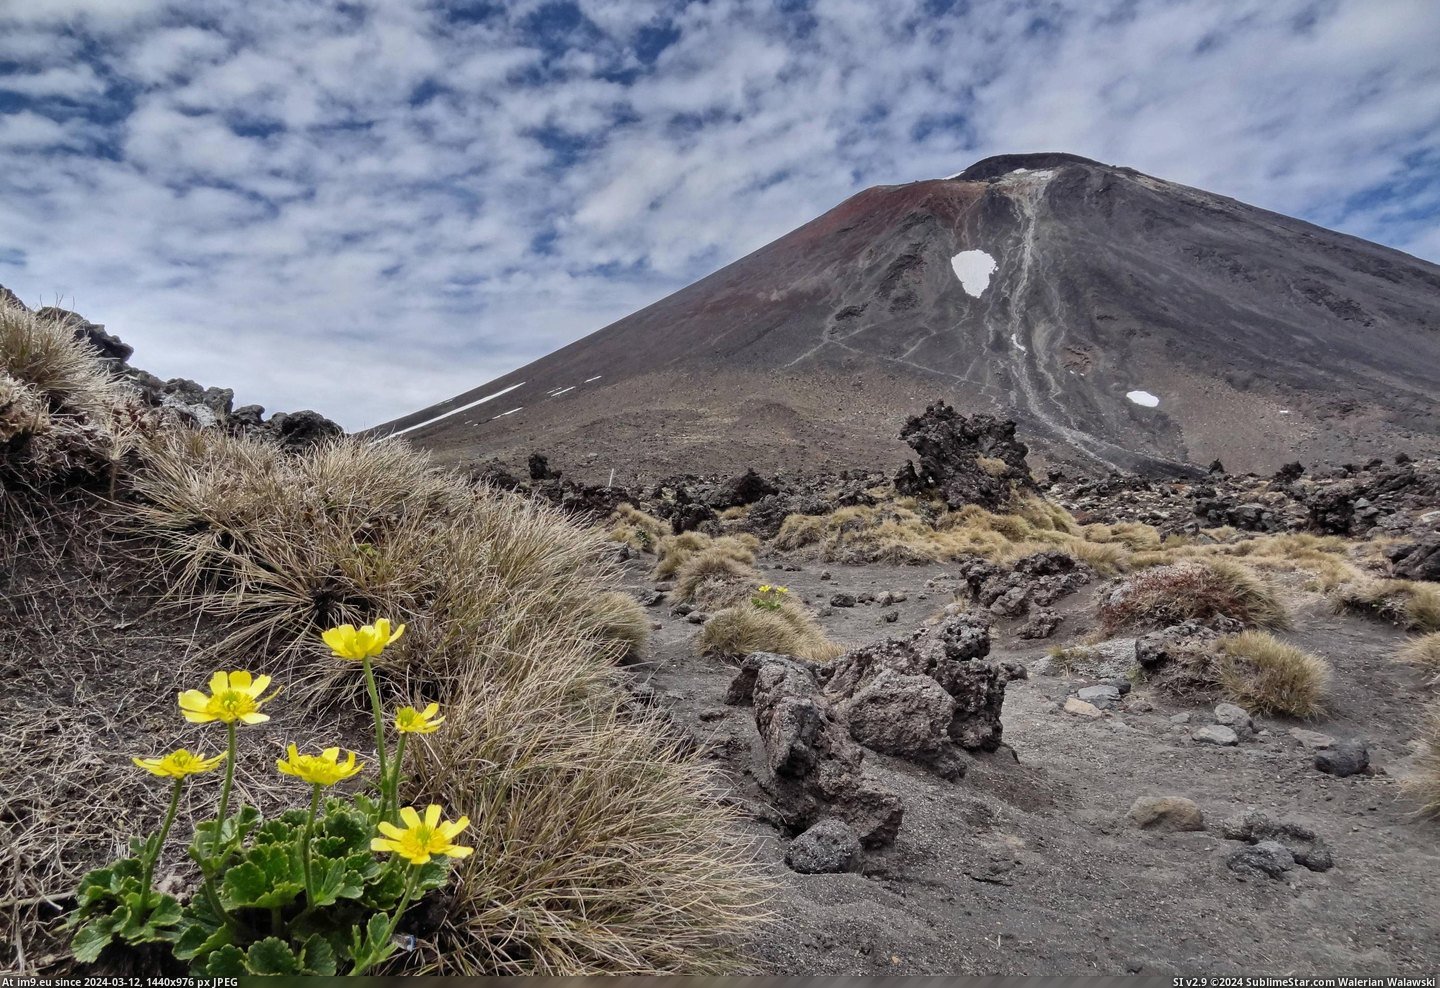 #Aka #Mount #Zealand #Rings #Volcanic #Doom #Flowers #Base #Lord [Earthporn] Flowers at the base of volcanic Mount Ngauruhoe, New Zealand (AKA 'Mount Doom' from Lord of the Rings)  [4608x3144] Pic. (Изображение из альбом My r/EARTHPORN favs))